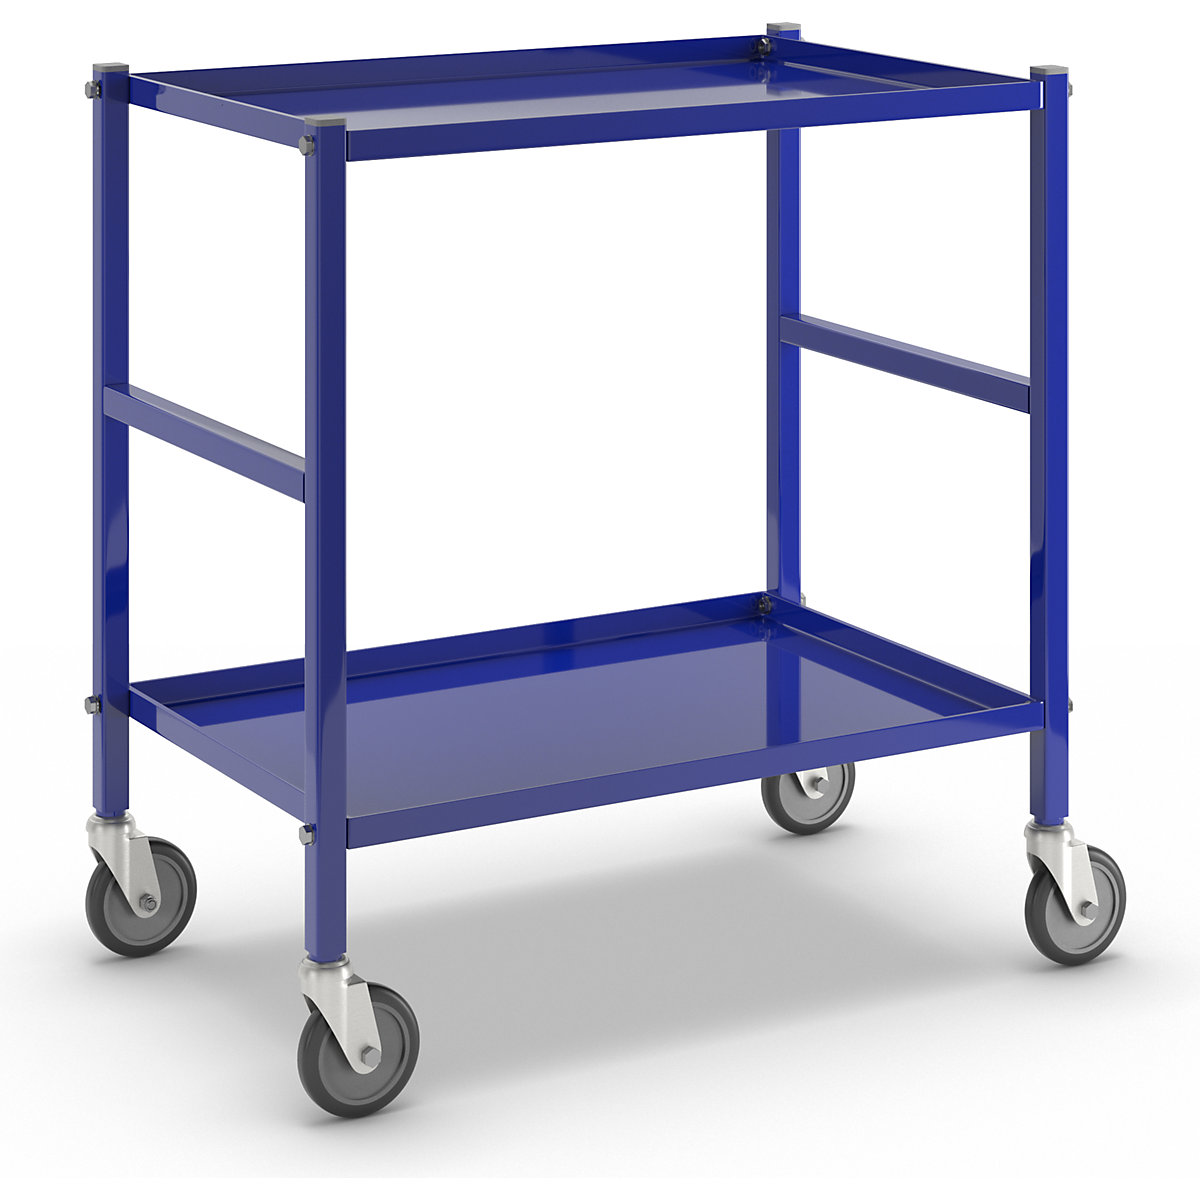 Table trolley with 2 shelves - Kongamek